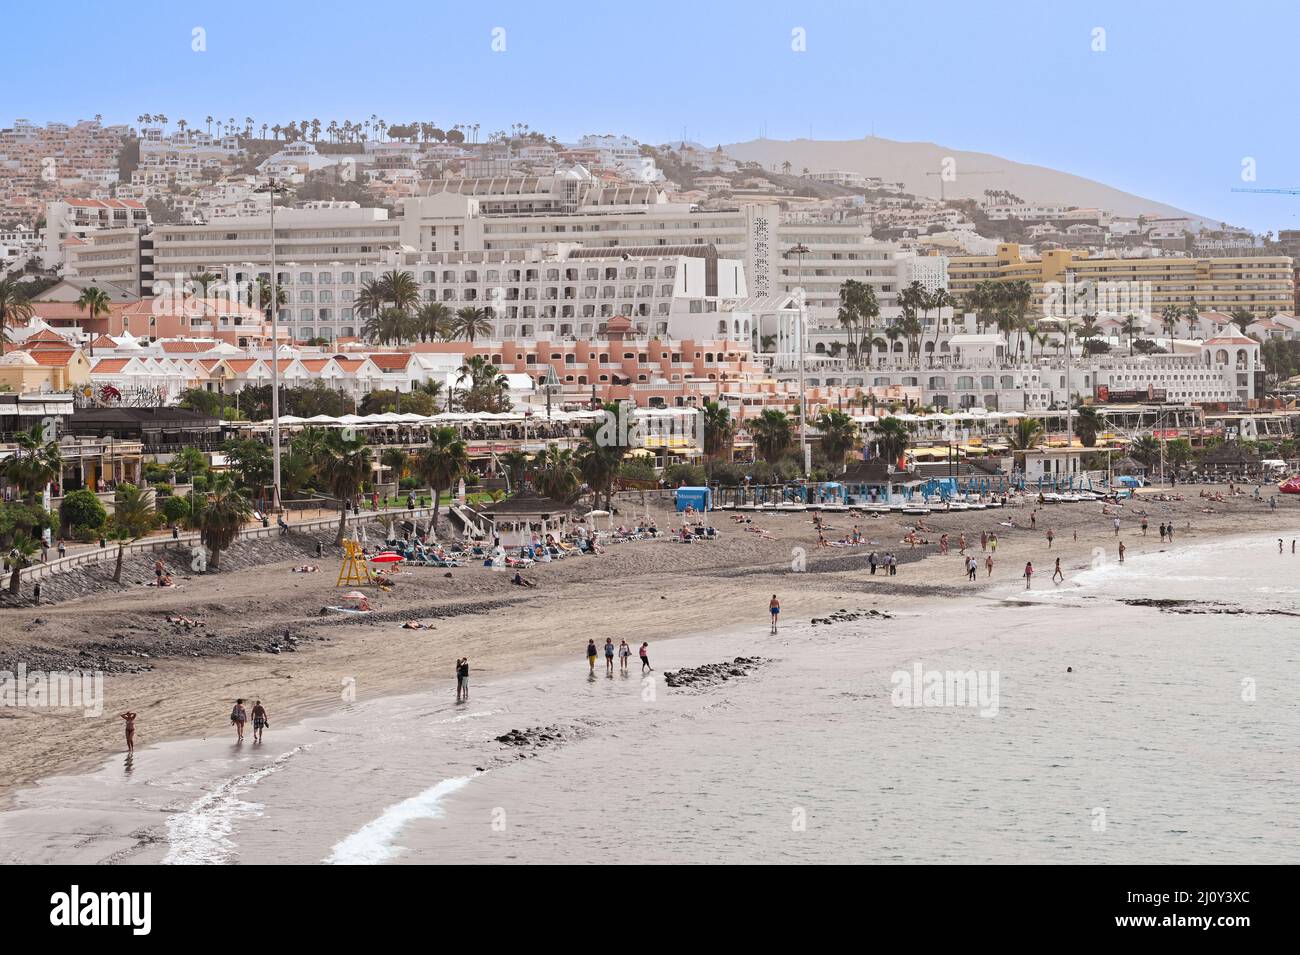 A view of a beach with imported sand mixed in with the natural volcanic sand in Costa Adeje, Tenerife with holiday makers enjoying the sunshine Stock Photo